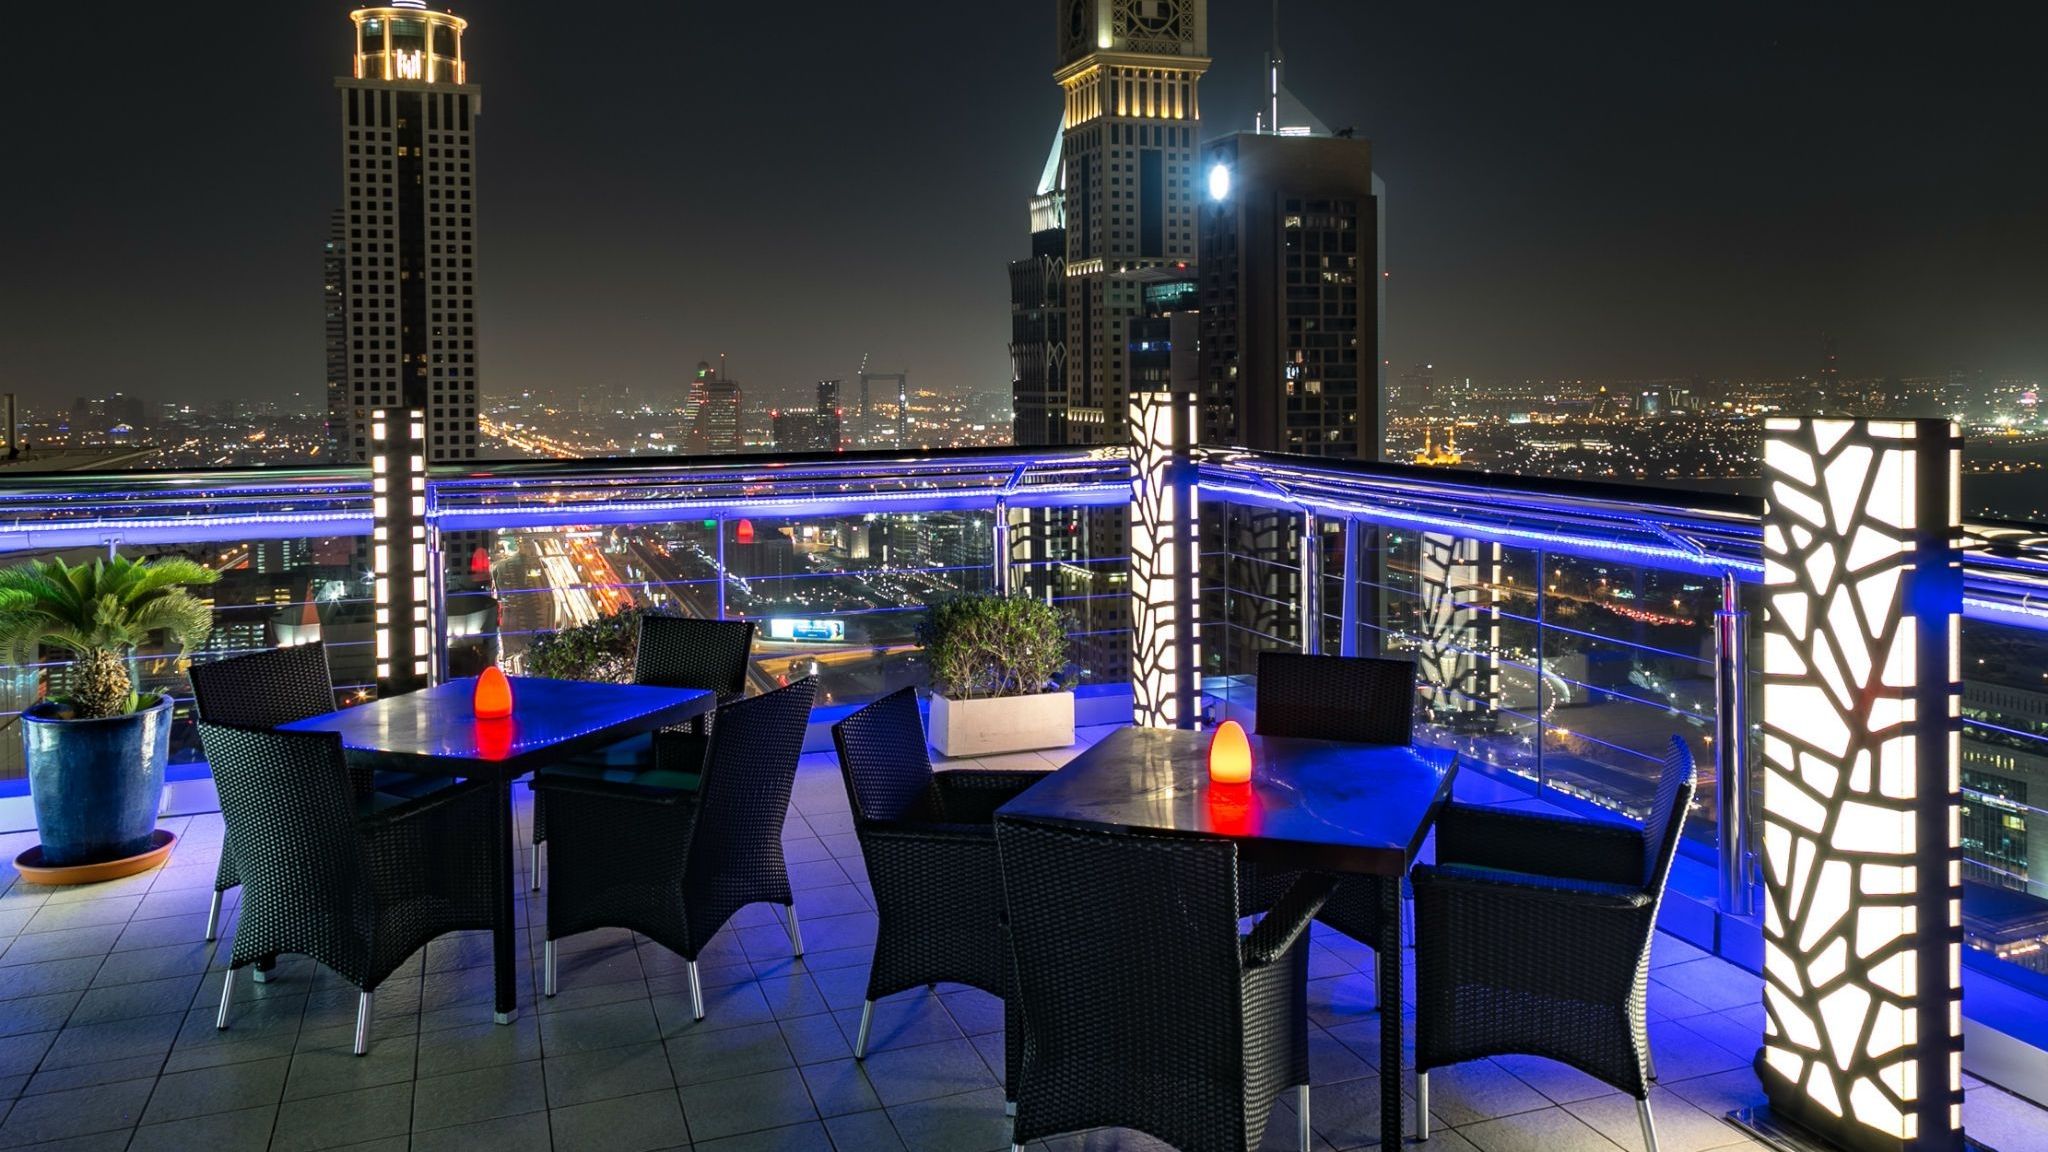 Rooftop Lounge and Bar in Dubai - Level 43 Sky Lounge